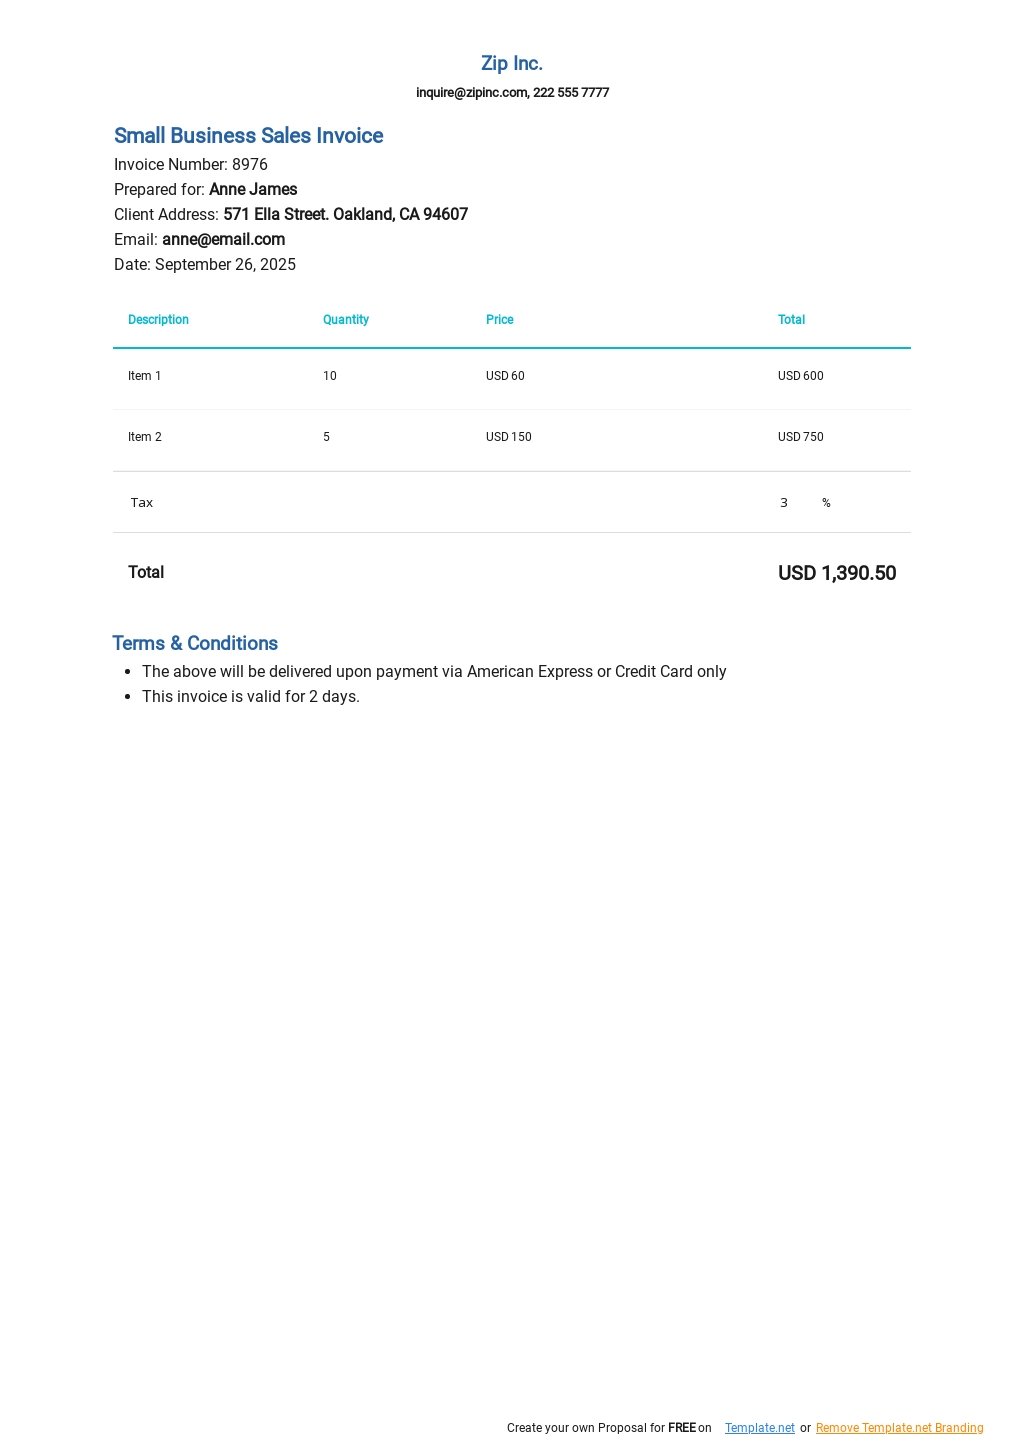 Small Business Sales Invoice Template.jpe